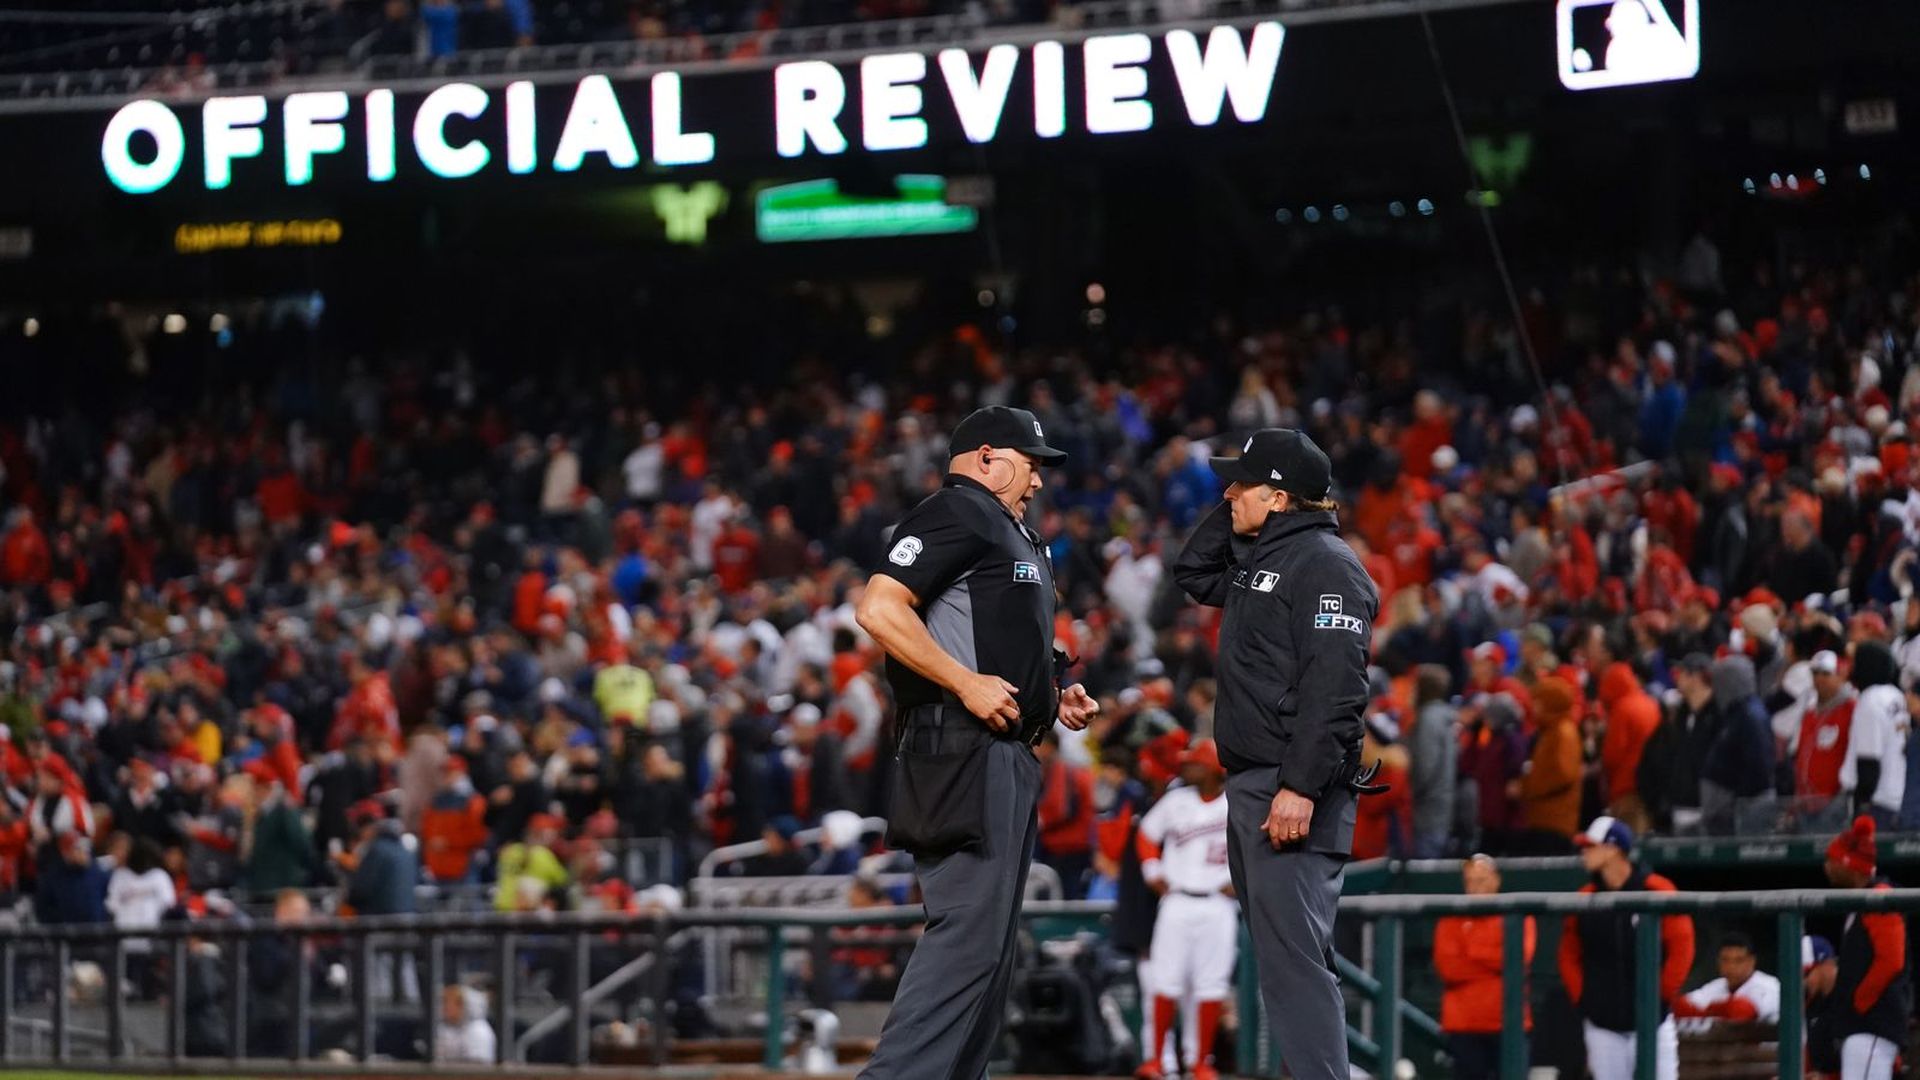 Umpires confer during an official review.